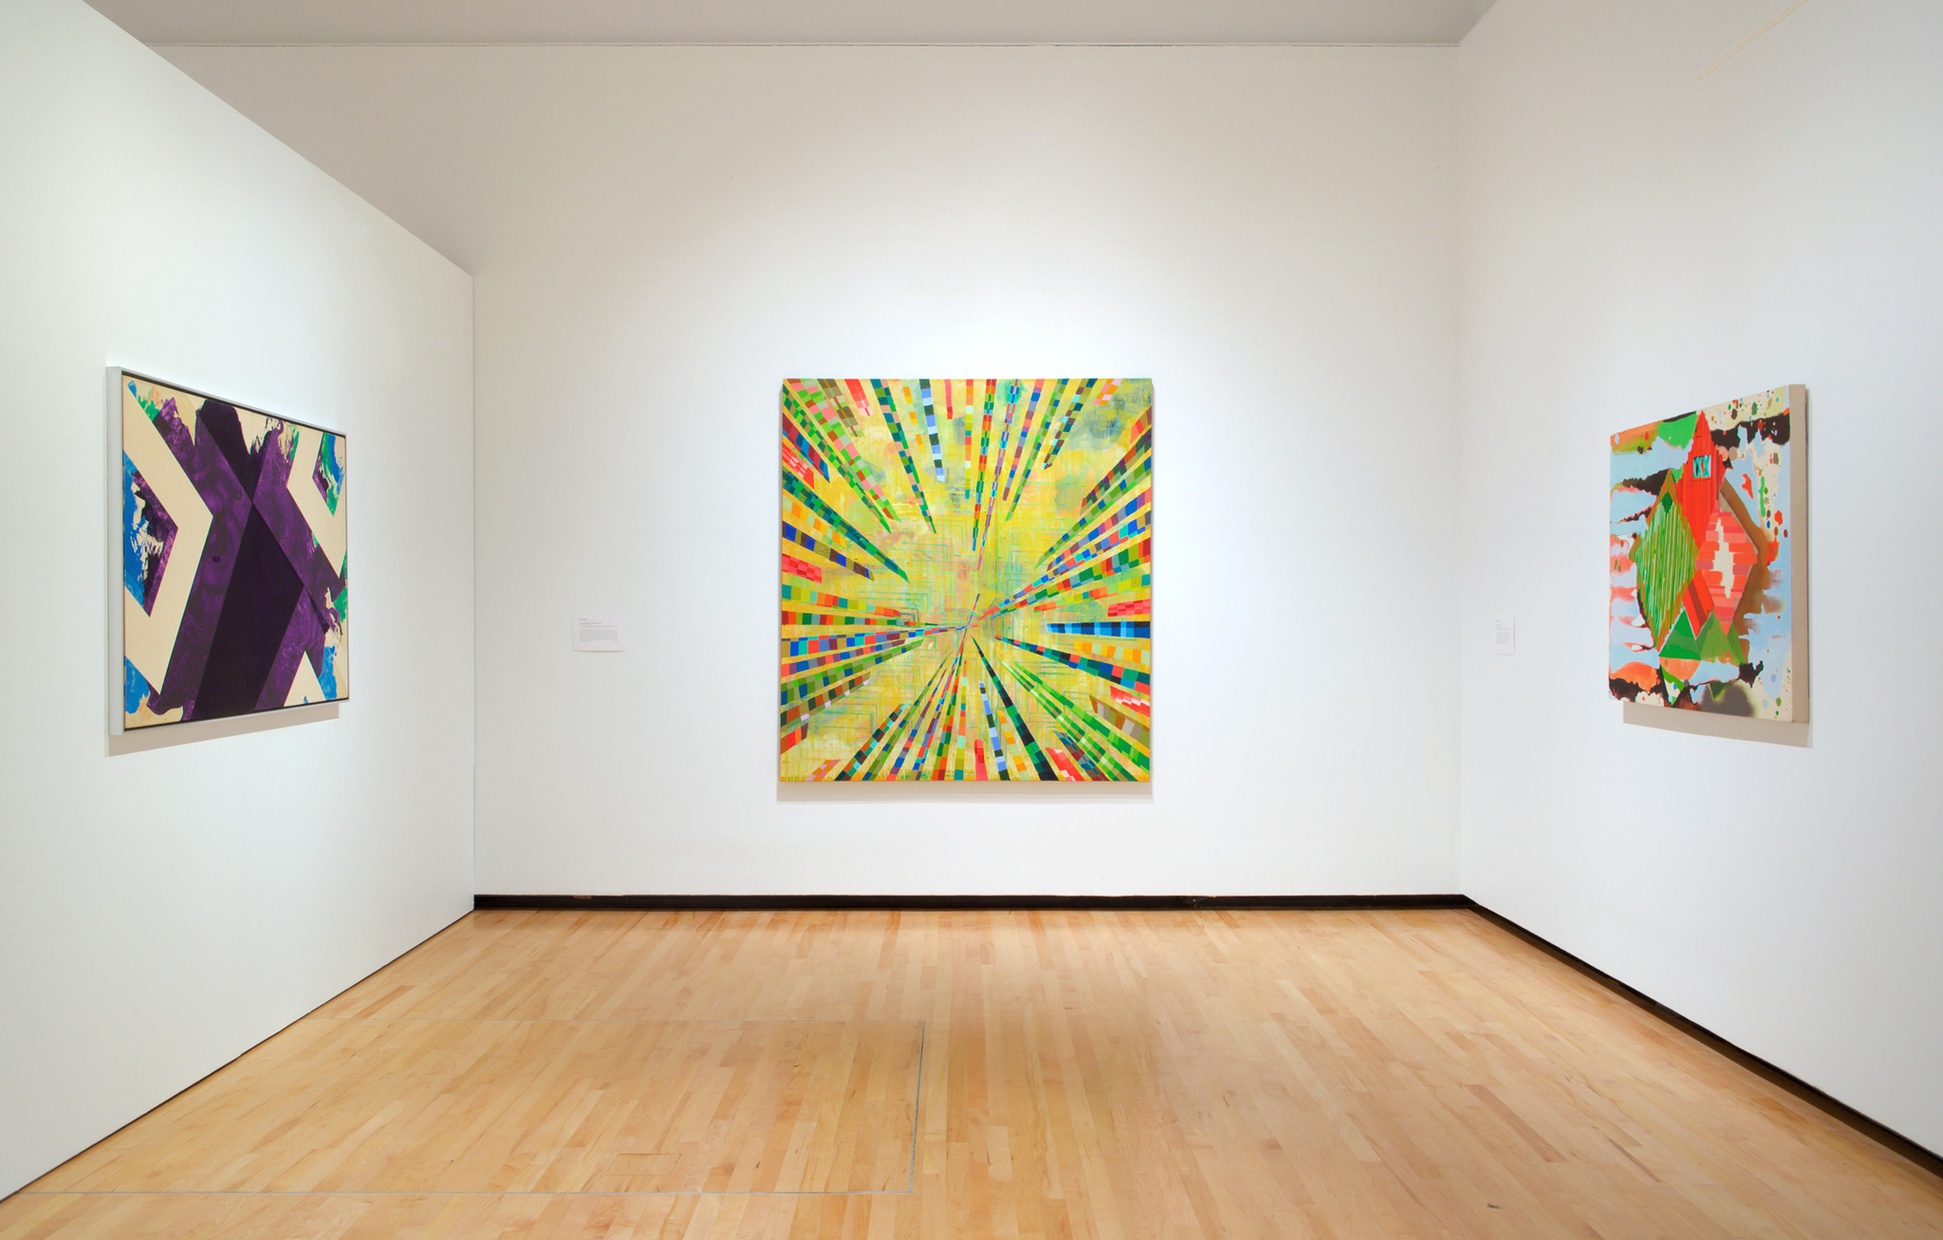 Three abstract, colorful paintings hang on white walls of a room with warm wood floors.